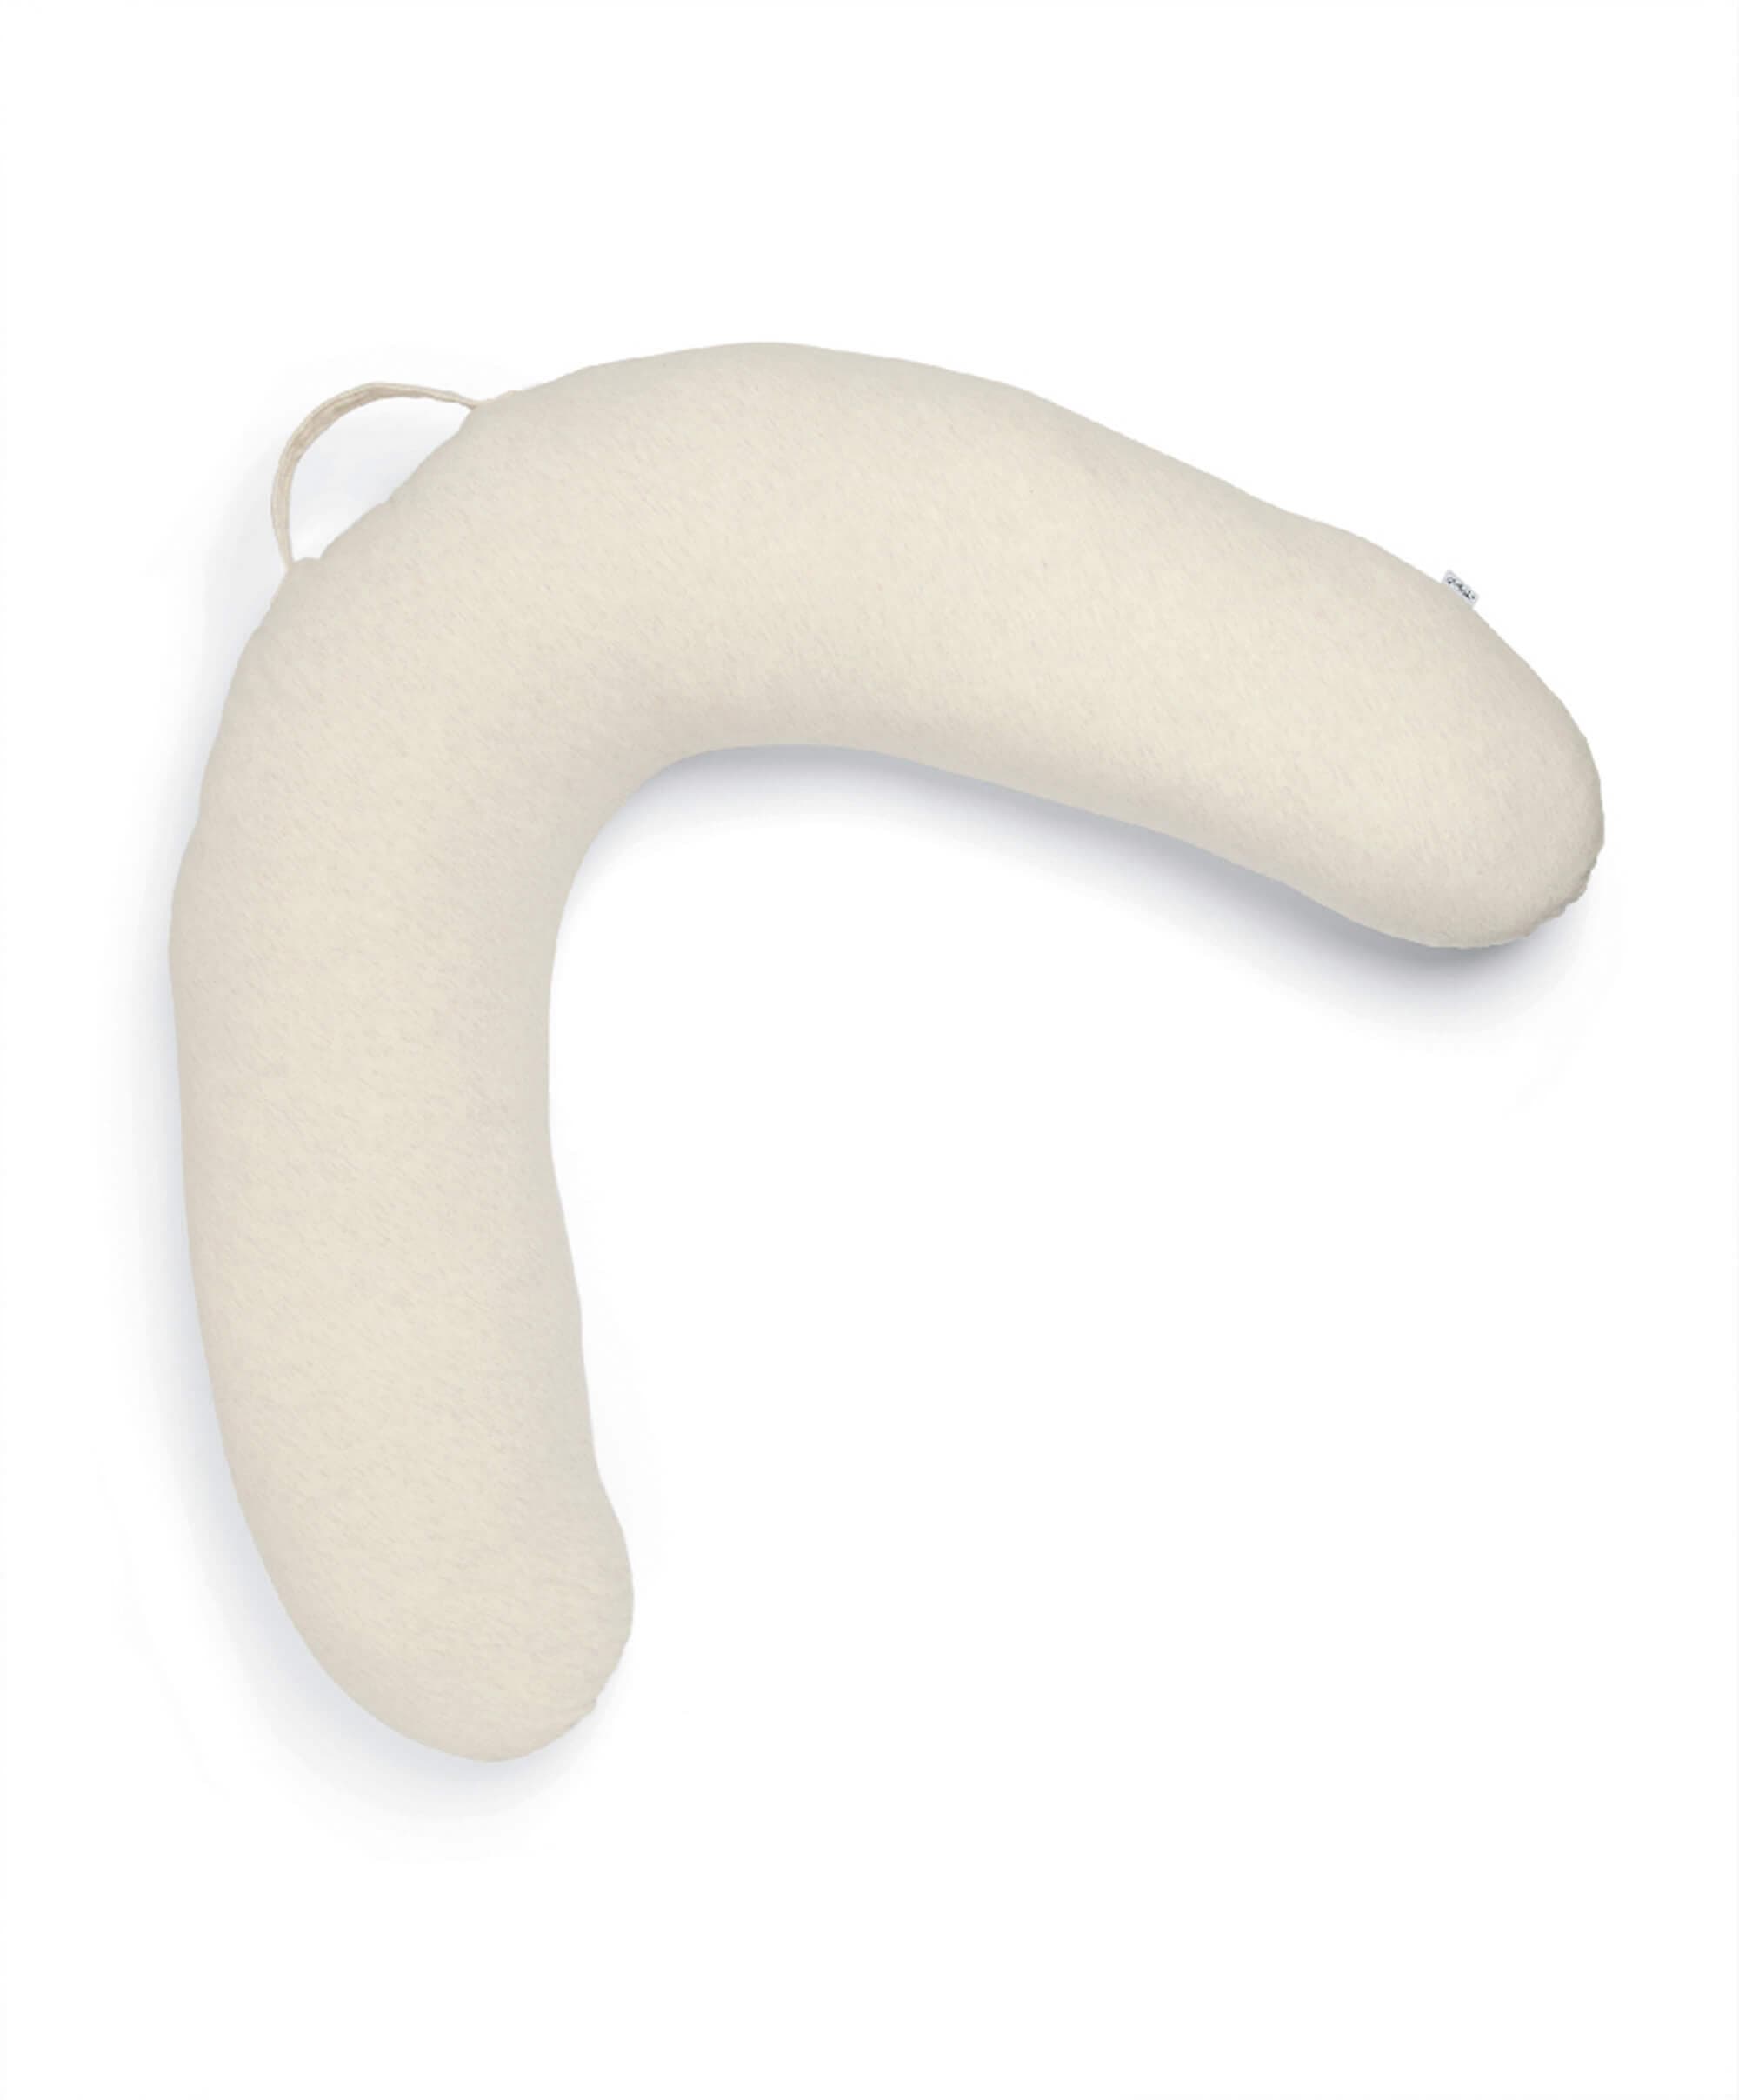 Welcome to the World Seedling Pregnancy & Nursing Pillow - Oatmeal Marl